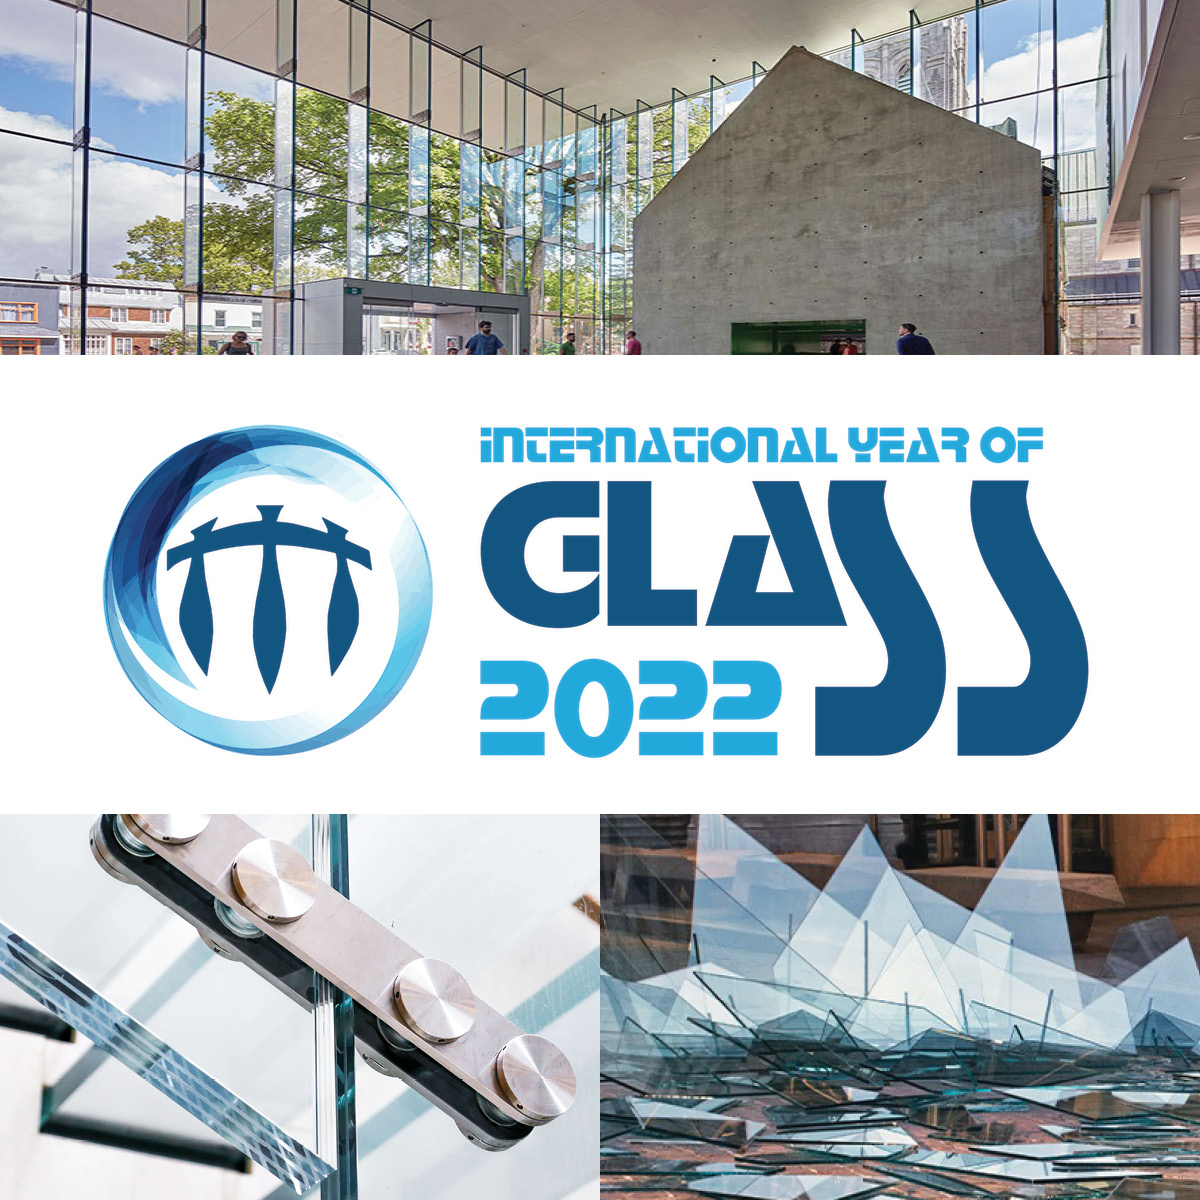 The International Year of Glass is HERE!